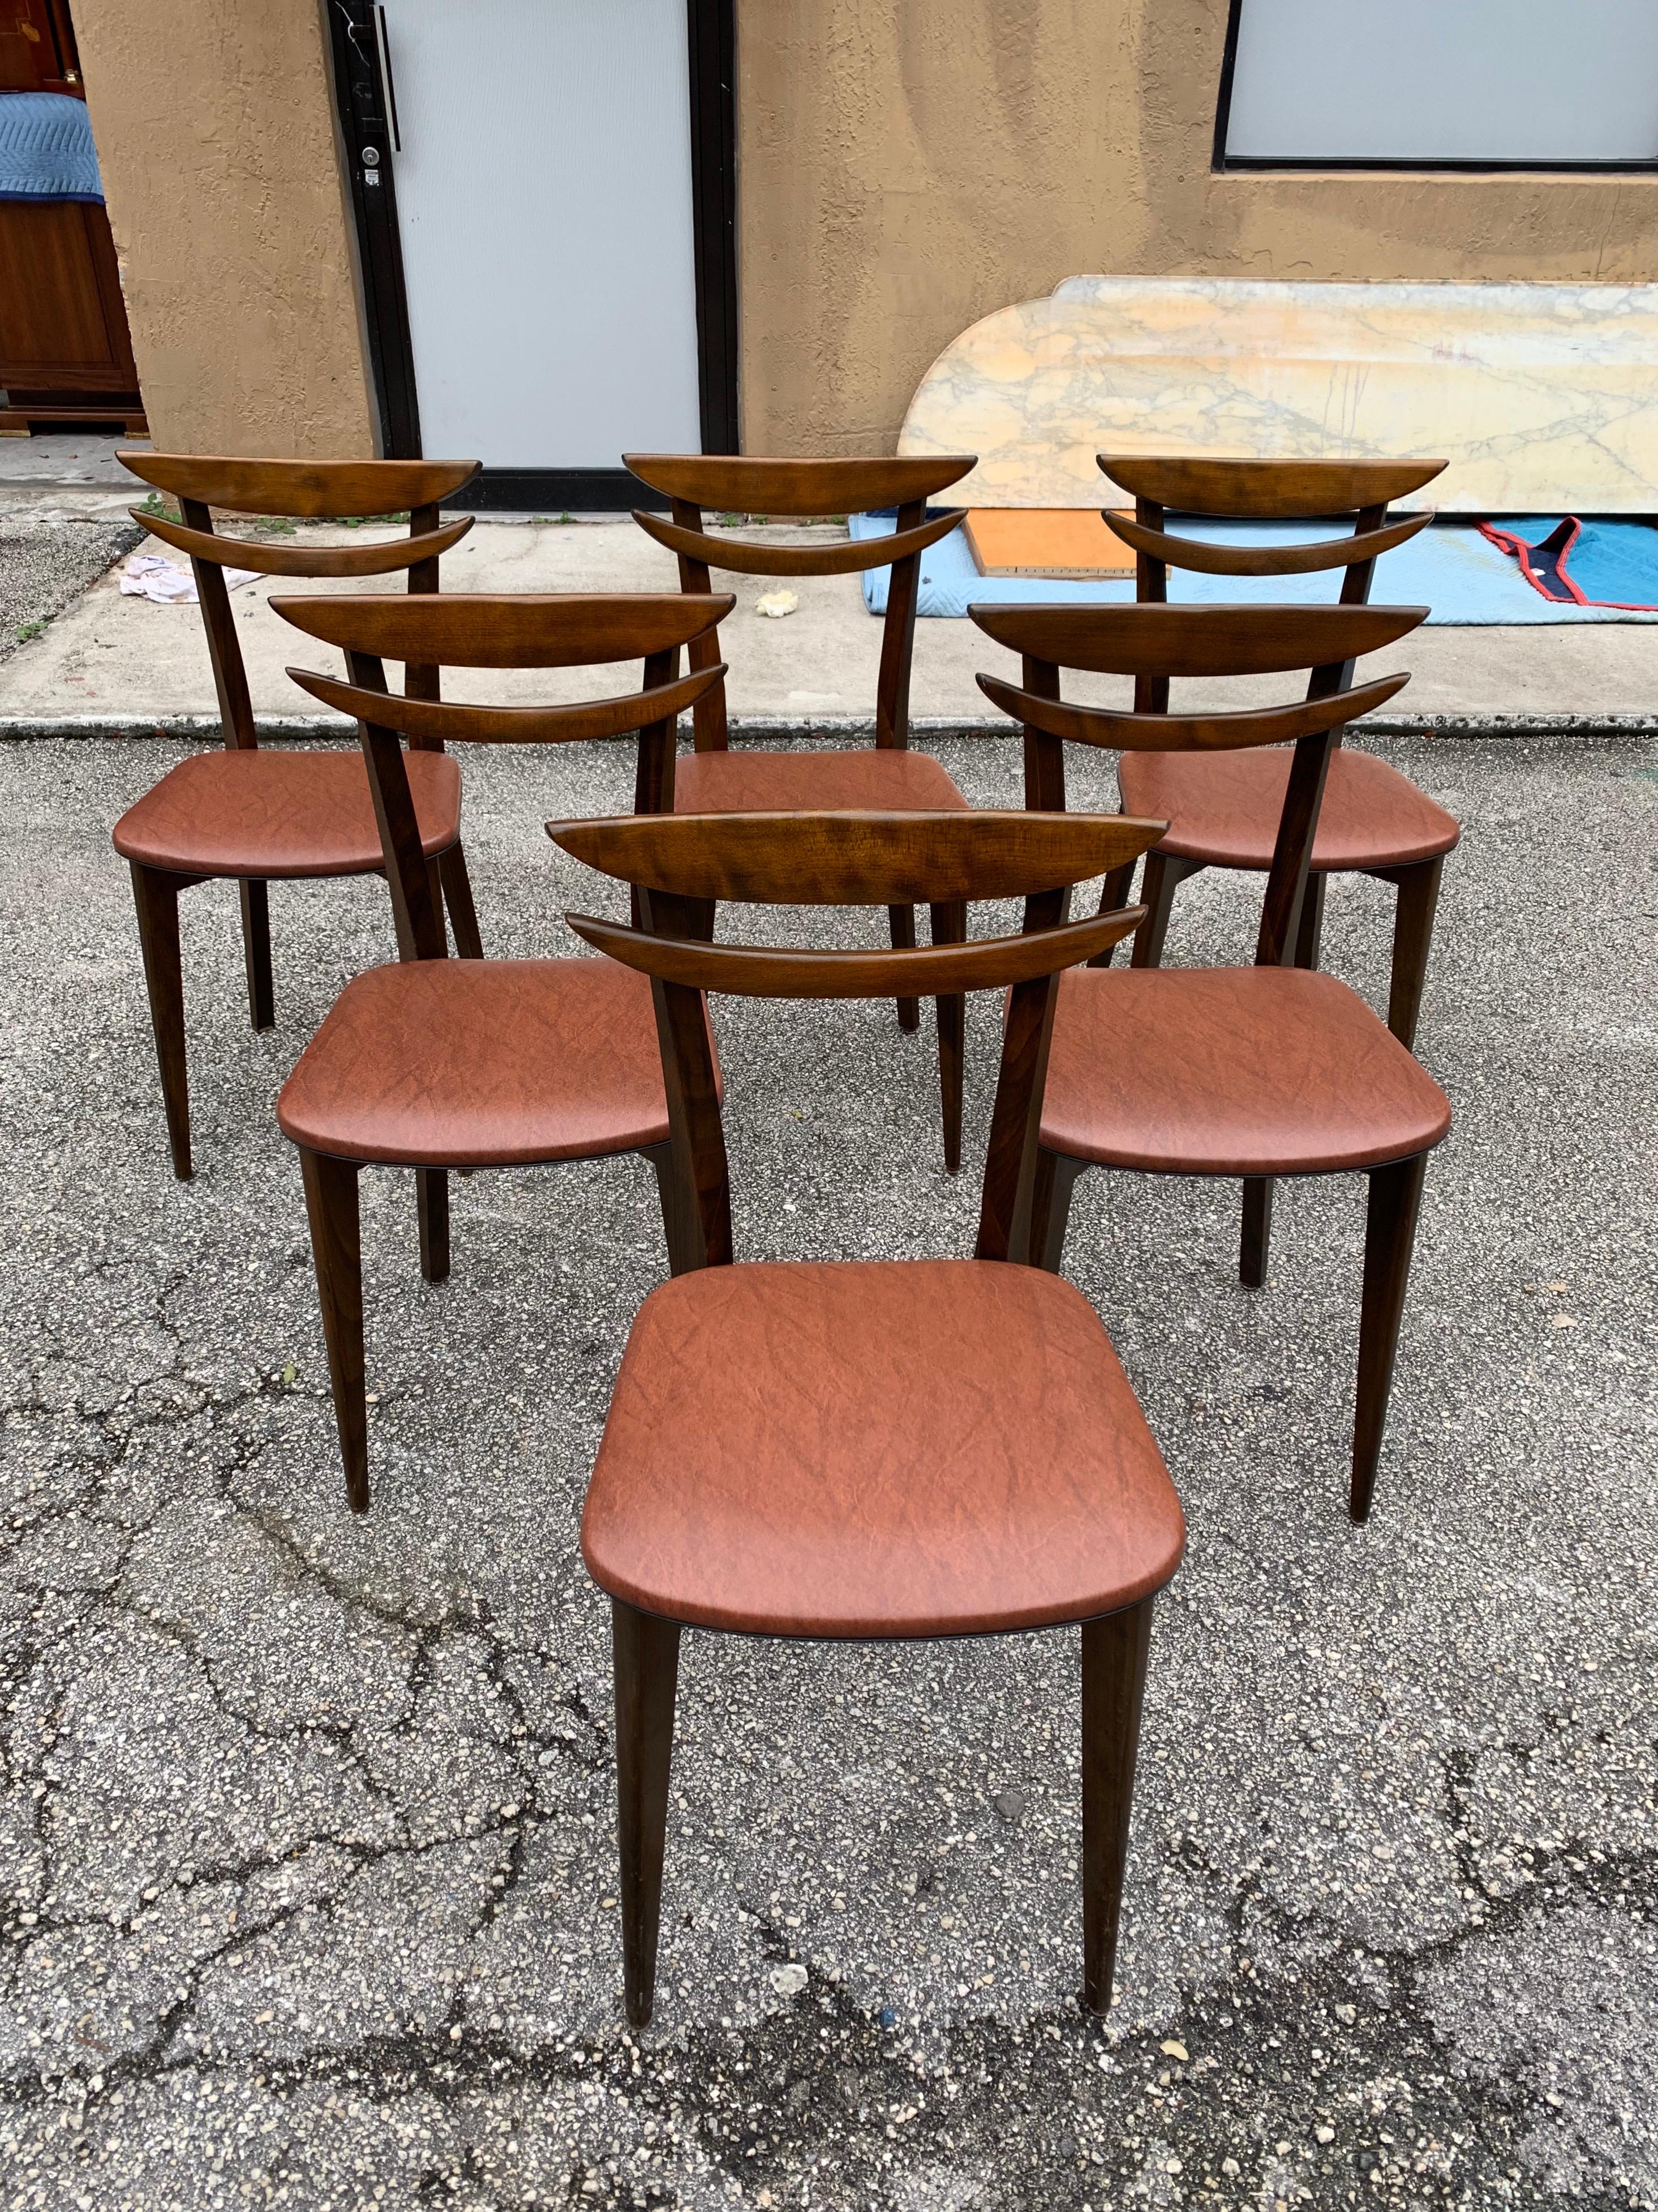 Set of 6 French Vintage Mid-Century Modern Solid Mahogany Dining Chairs, 1950s In Good Condition For Sale In Hialeah, FL